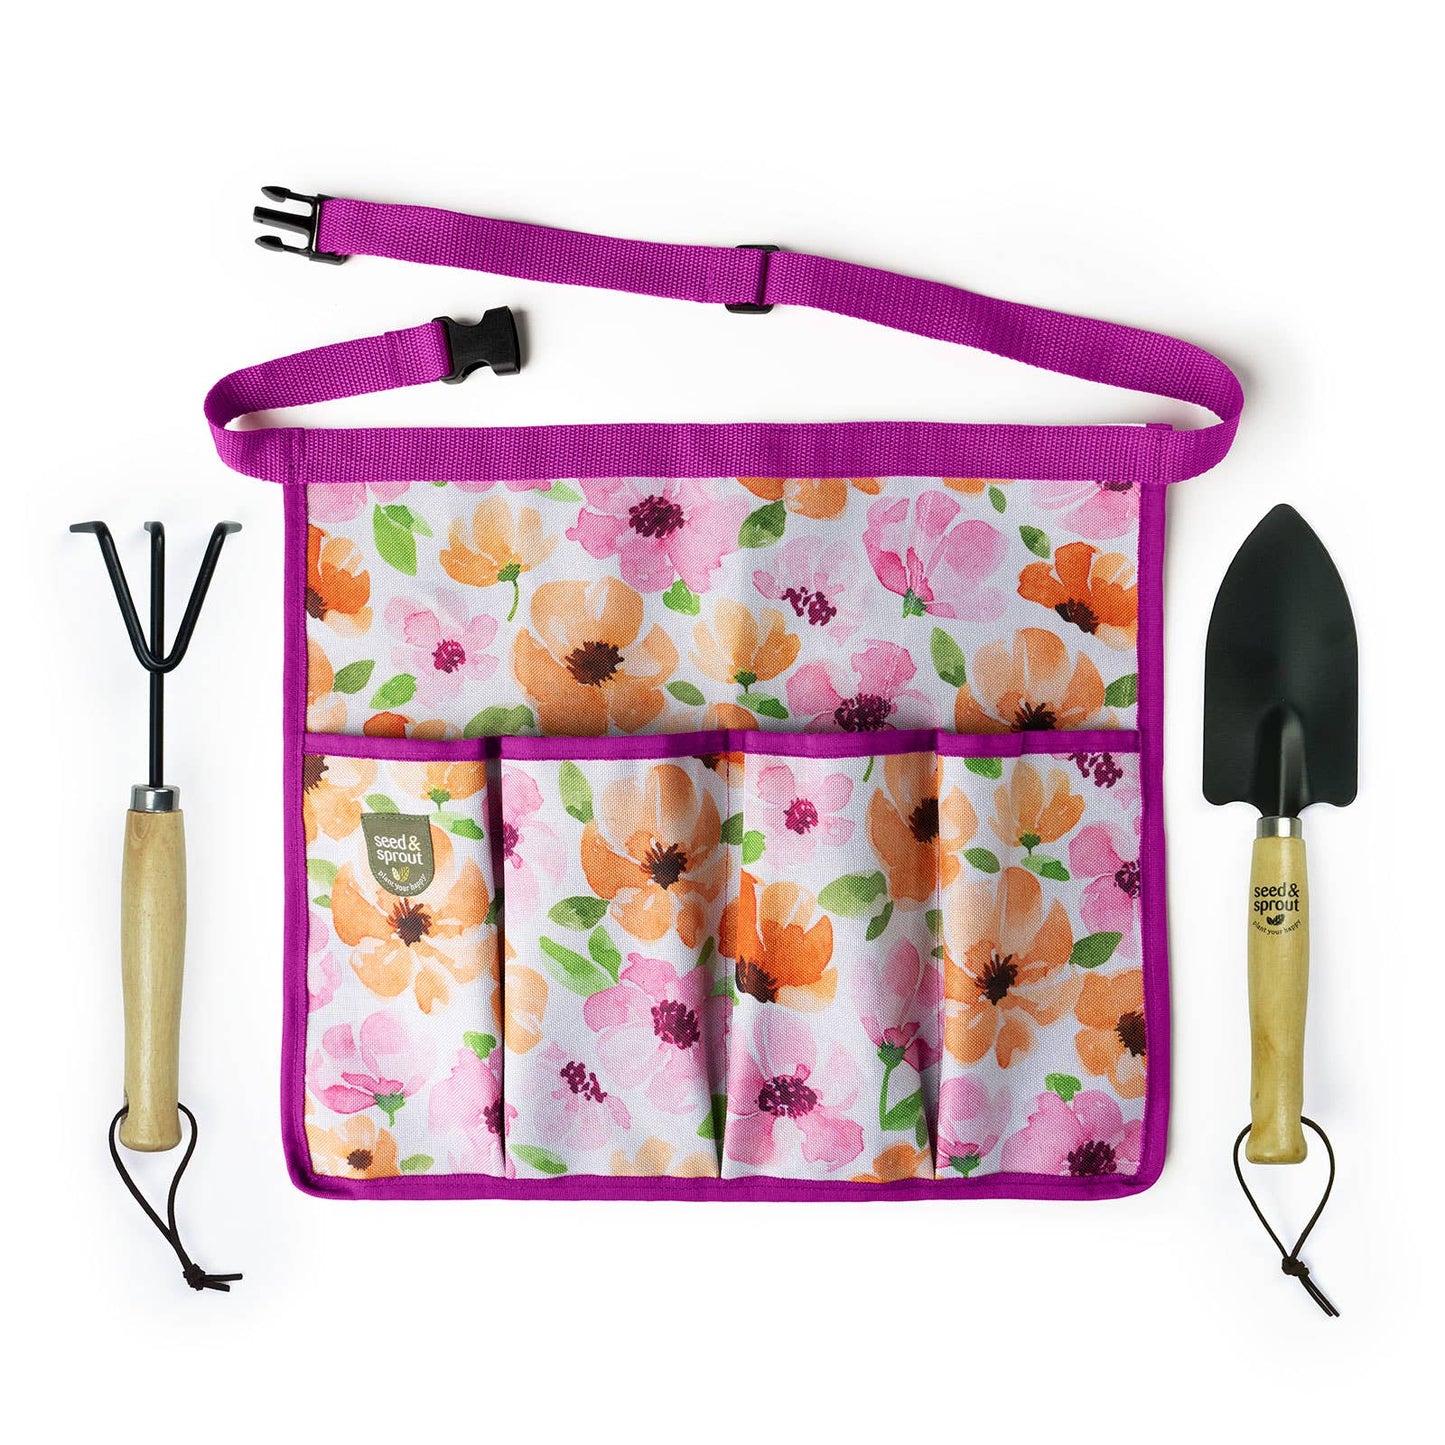 Seed & Sprout 3-Piece Gardening Set Southern Sweetness